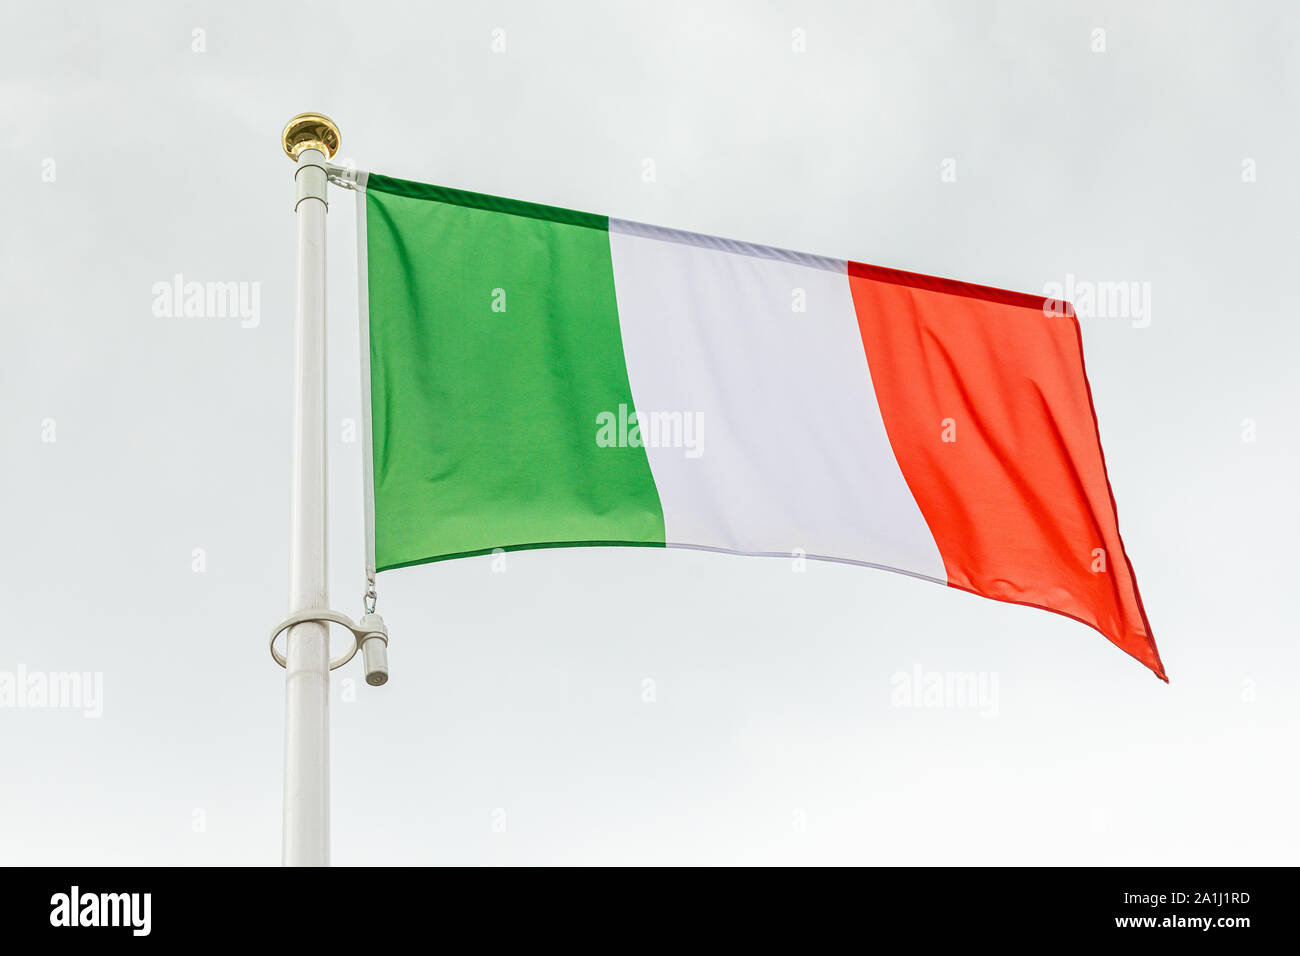 flag of Italy with green, white and red vertical stripes Stock Photo